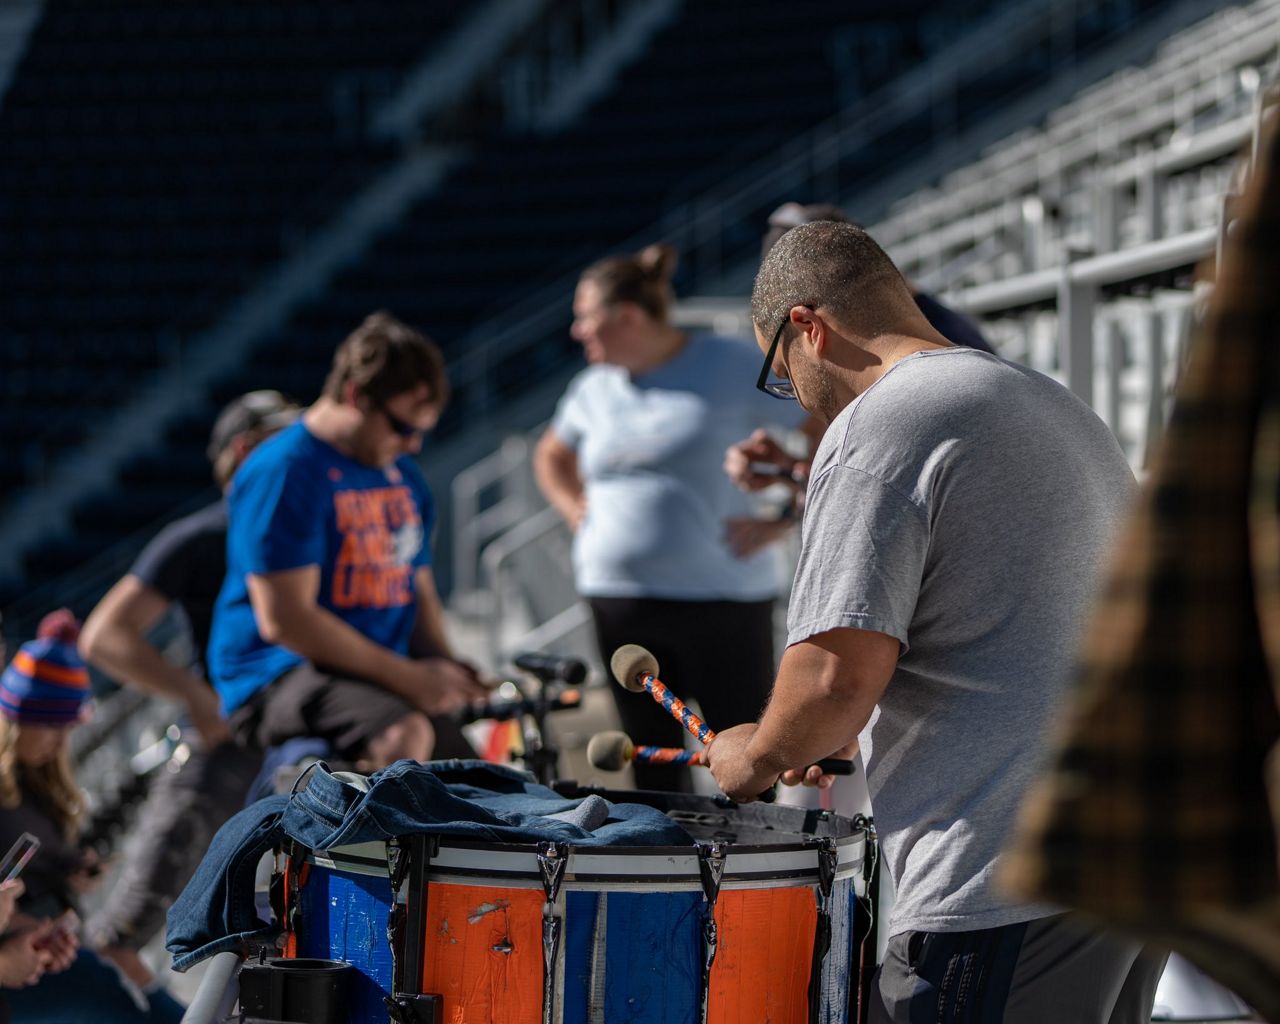 Local capos and drummers practice ahead of Friday's World Cup qualifier between the United States and Mexico. (Photo: Brendon Yancey)